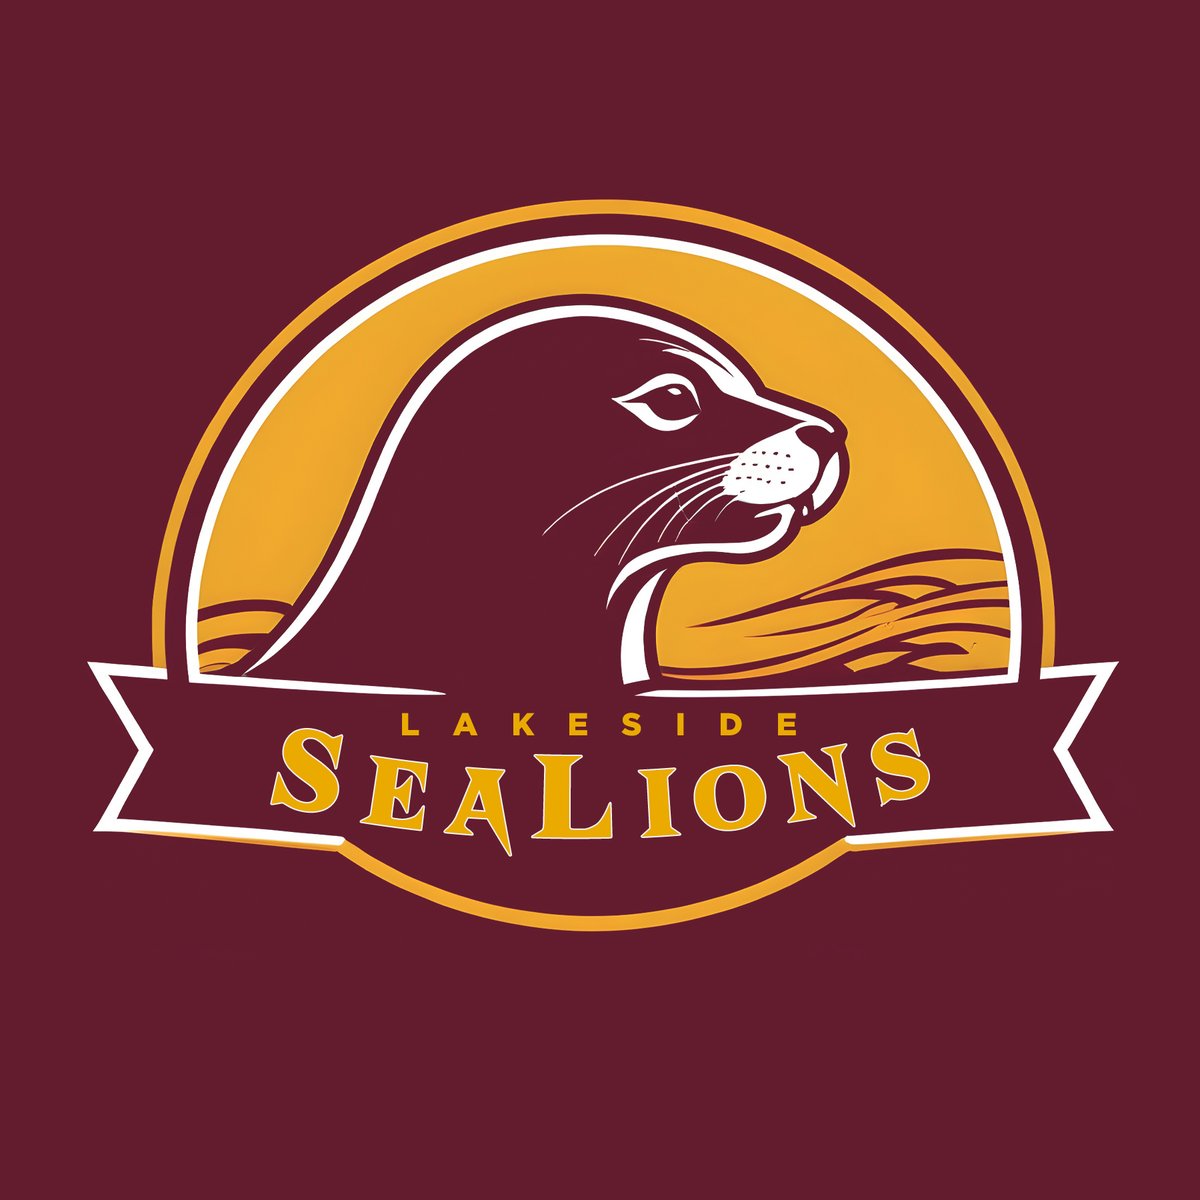 After a unanimous decision made by Lakeside’s Board of Directors, in concert with Head of School Kai Bynum and Director of Athletics Chris Hartley, Lakeside School and it’s Athletics teams will now be known by the SeaLions. Read more here: lakesideschool.org/post-details/~… #FearTheSea